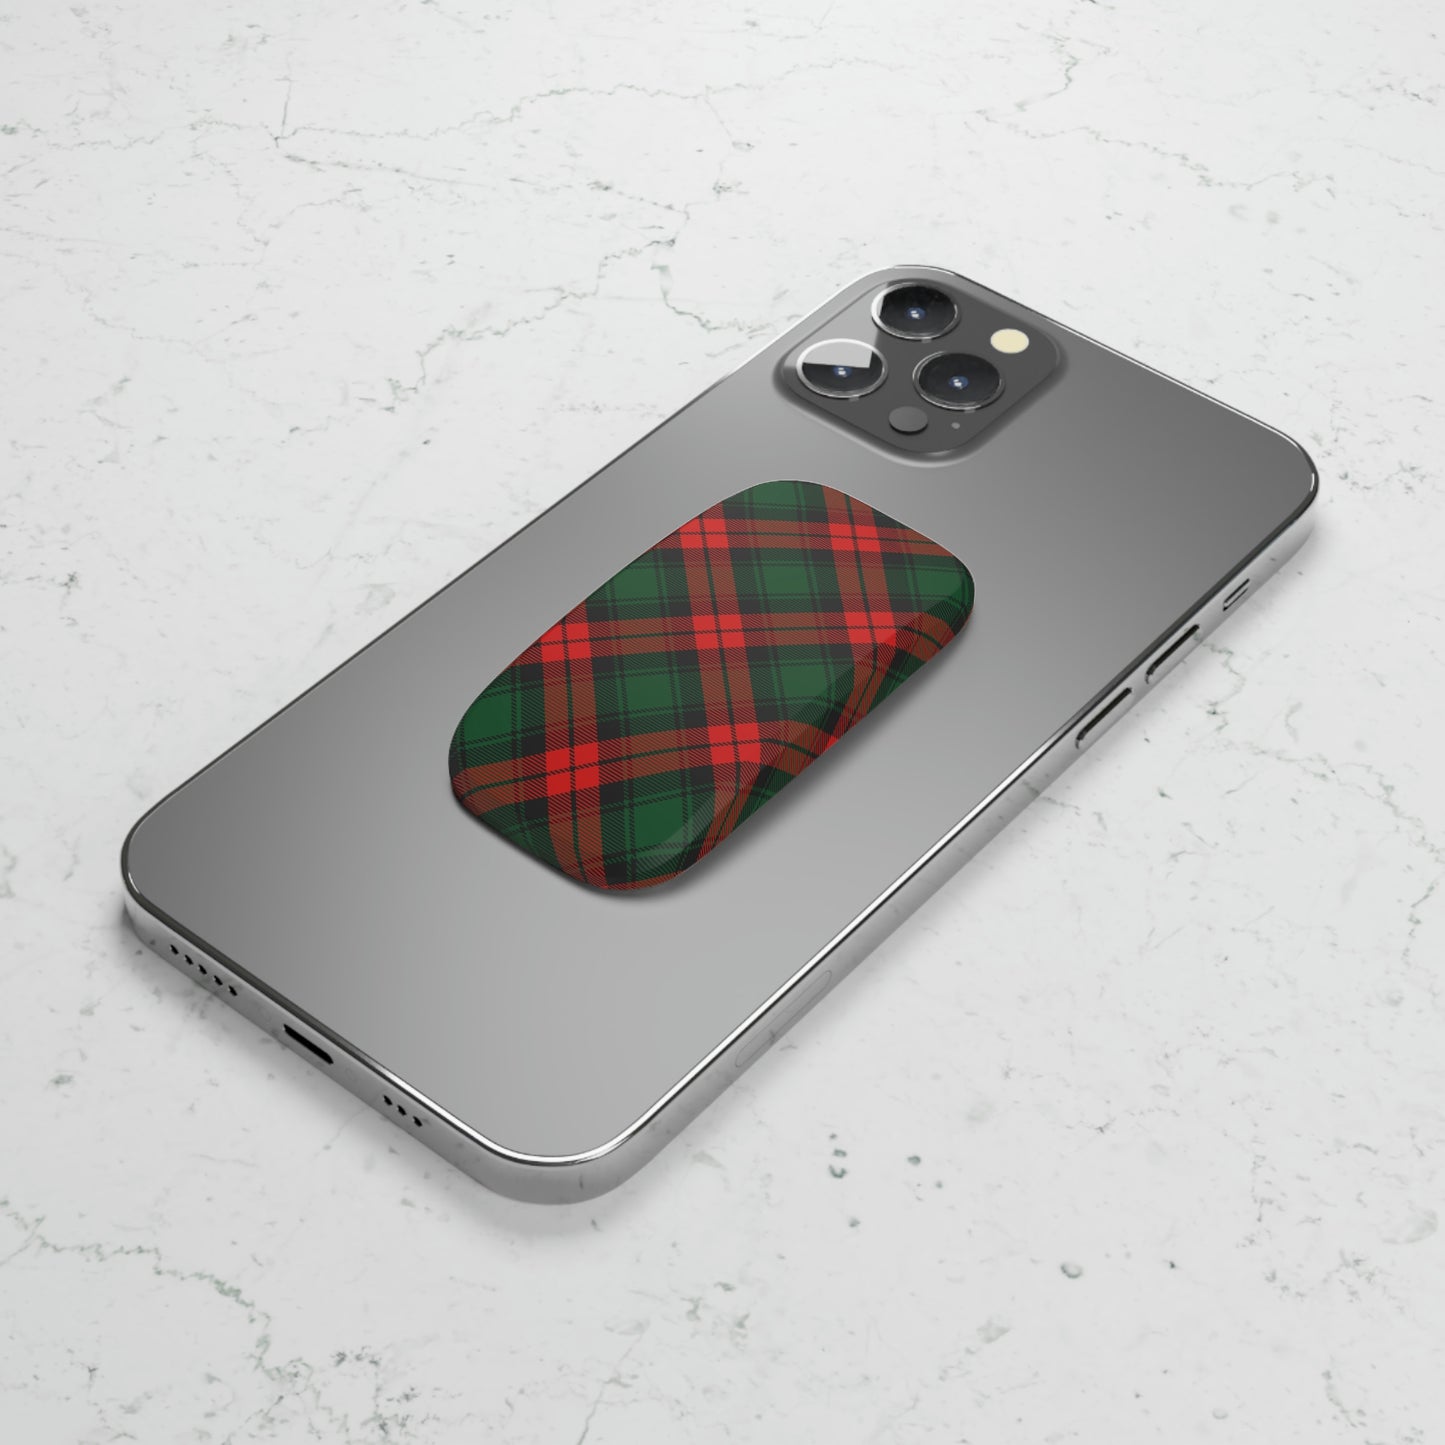 Red and Green Tartan Plaid Phone Click-On Grip